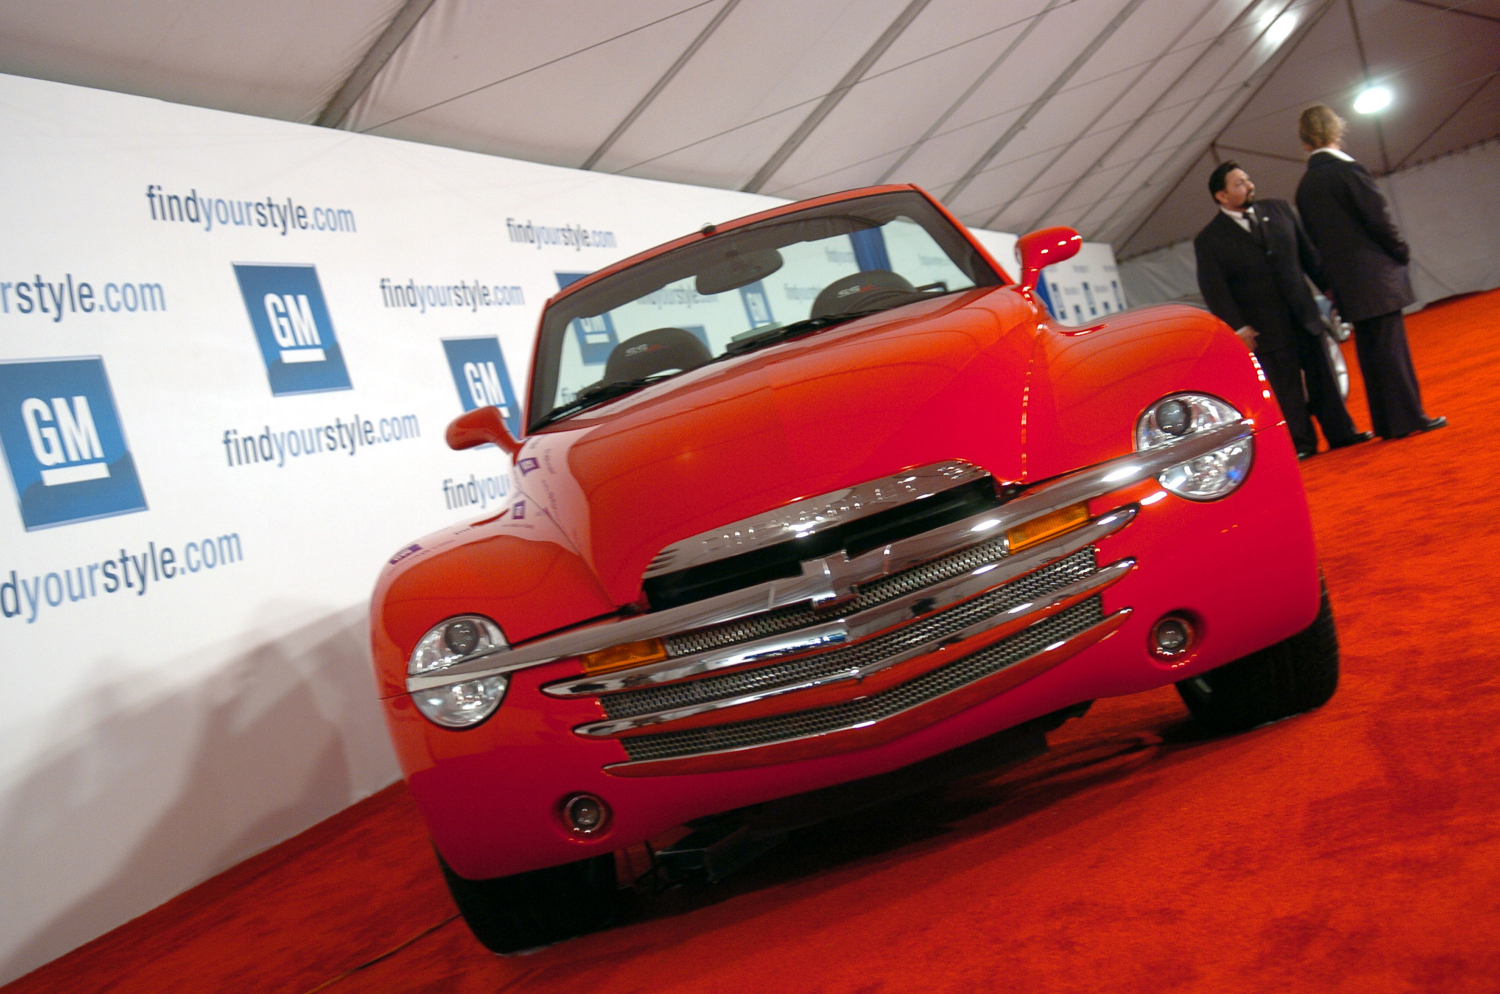 Discontinued pickup trucks that should come back like the Chevrolet SSR